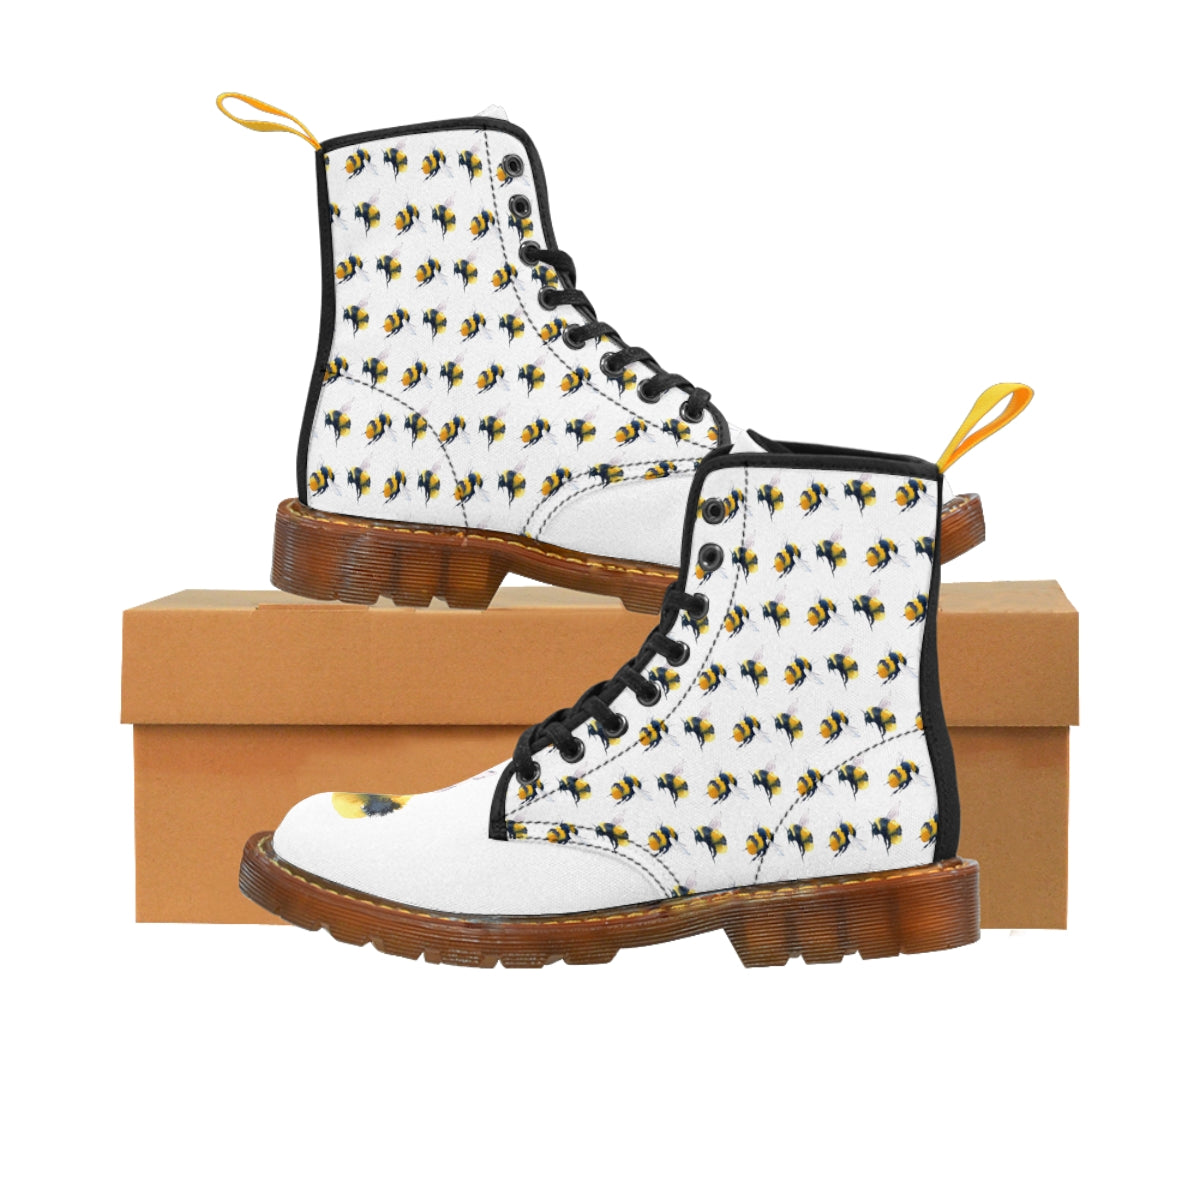 Friendly Flying Bees Men's White Canvas Boots Brown Shoes Bee boots combat boots fun mens boots Mens boots mens fashion boots mens shoes mens white boots Shoes unique mens boots vegan boots vegan combat boots